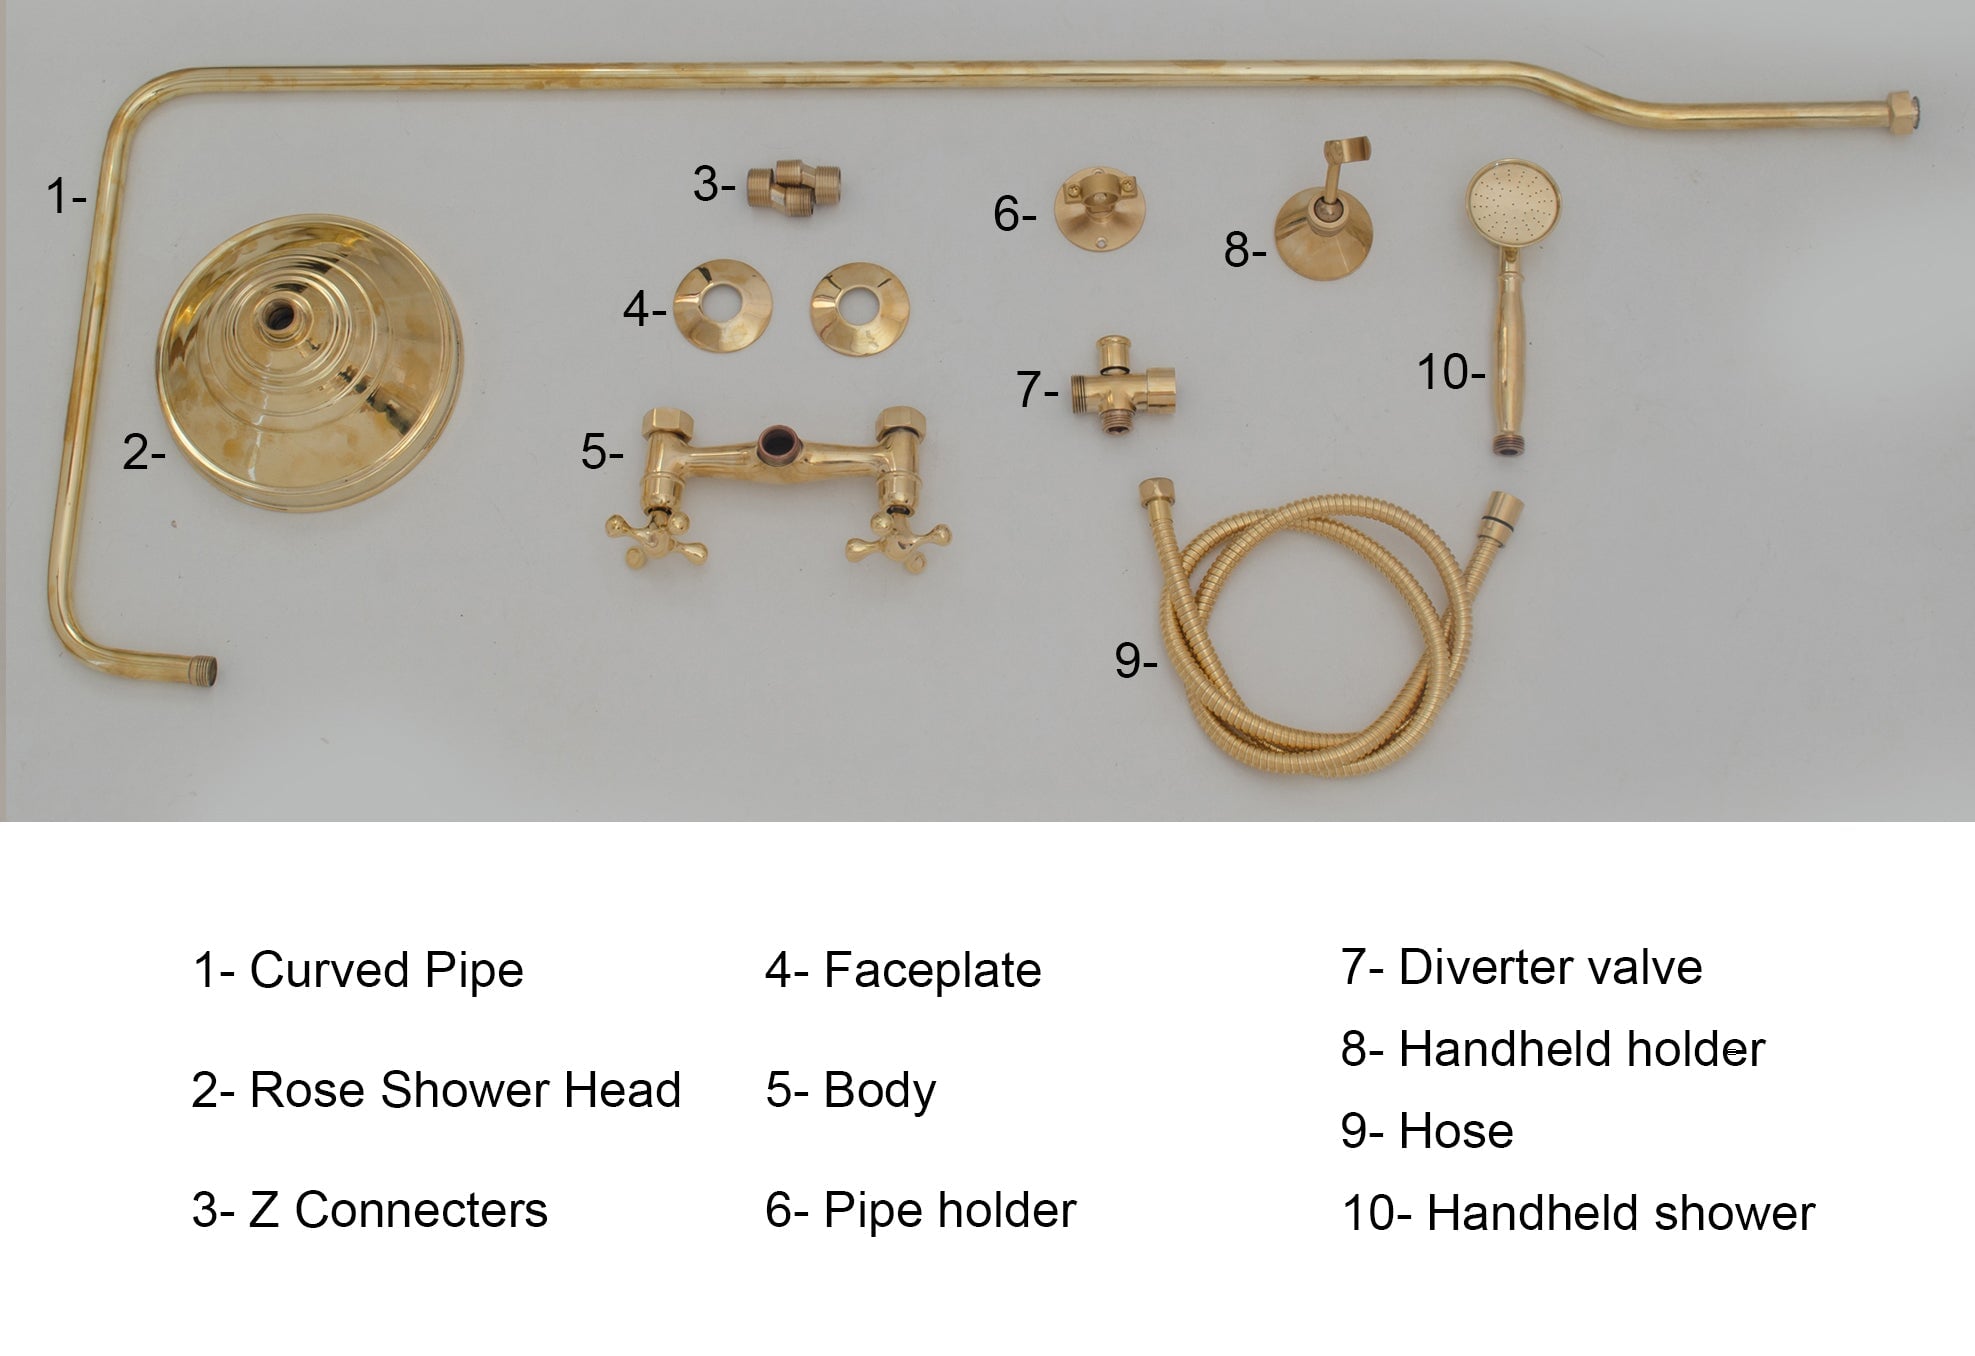 Unlacquered Brass Shower System - Exposed Pipe Rain Shower and Handheld